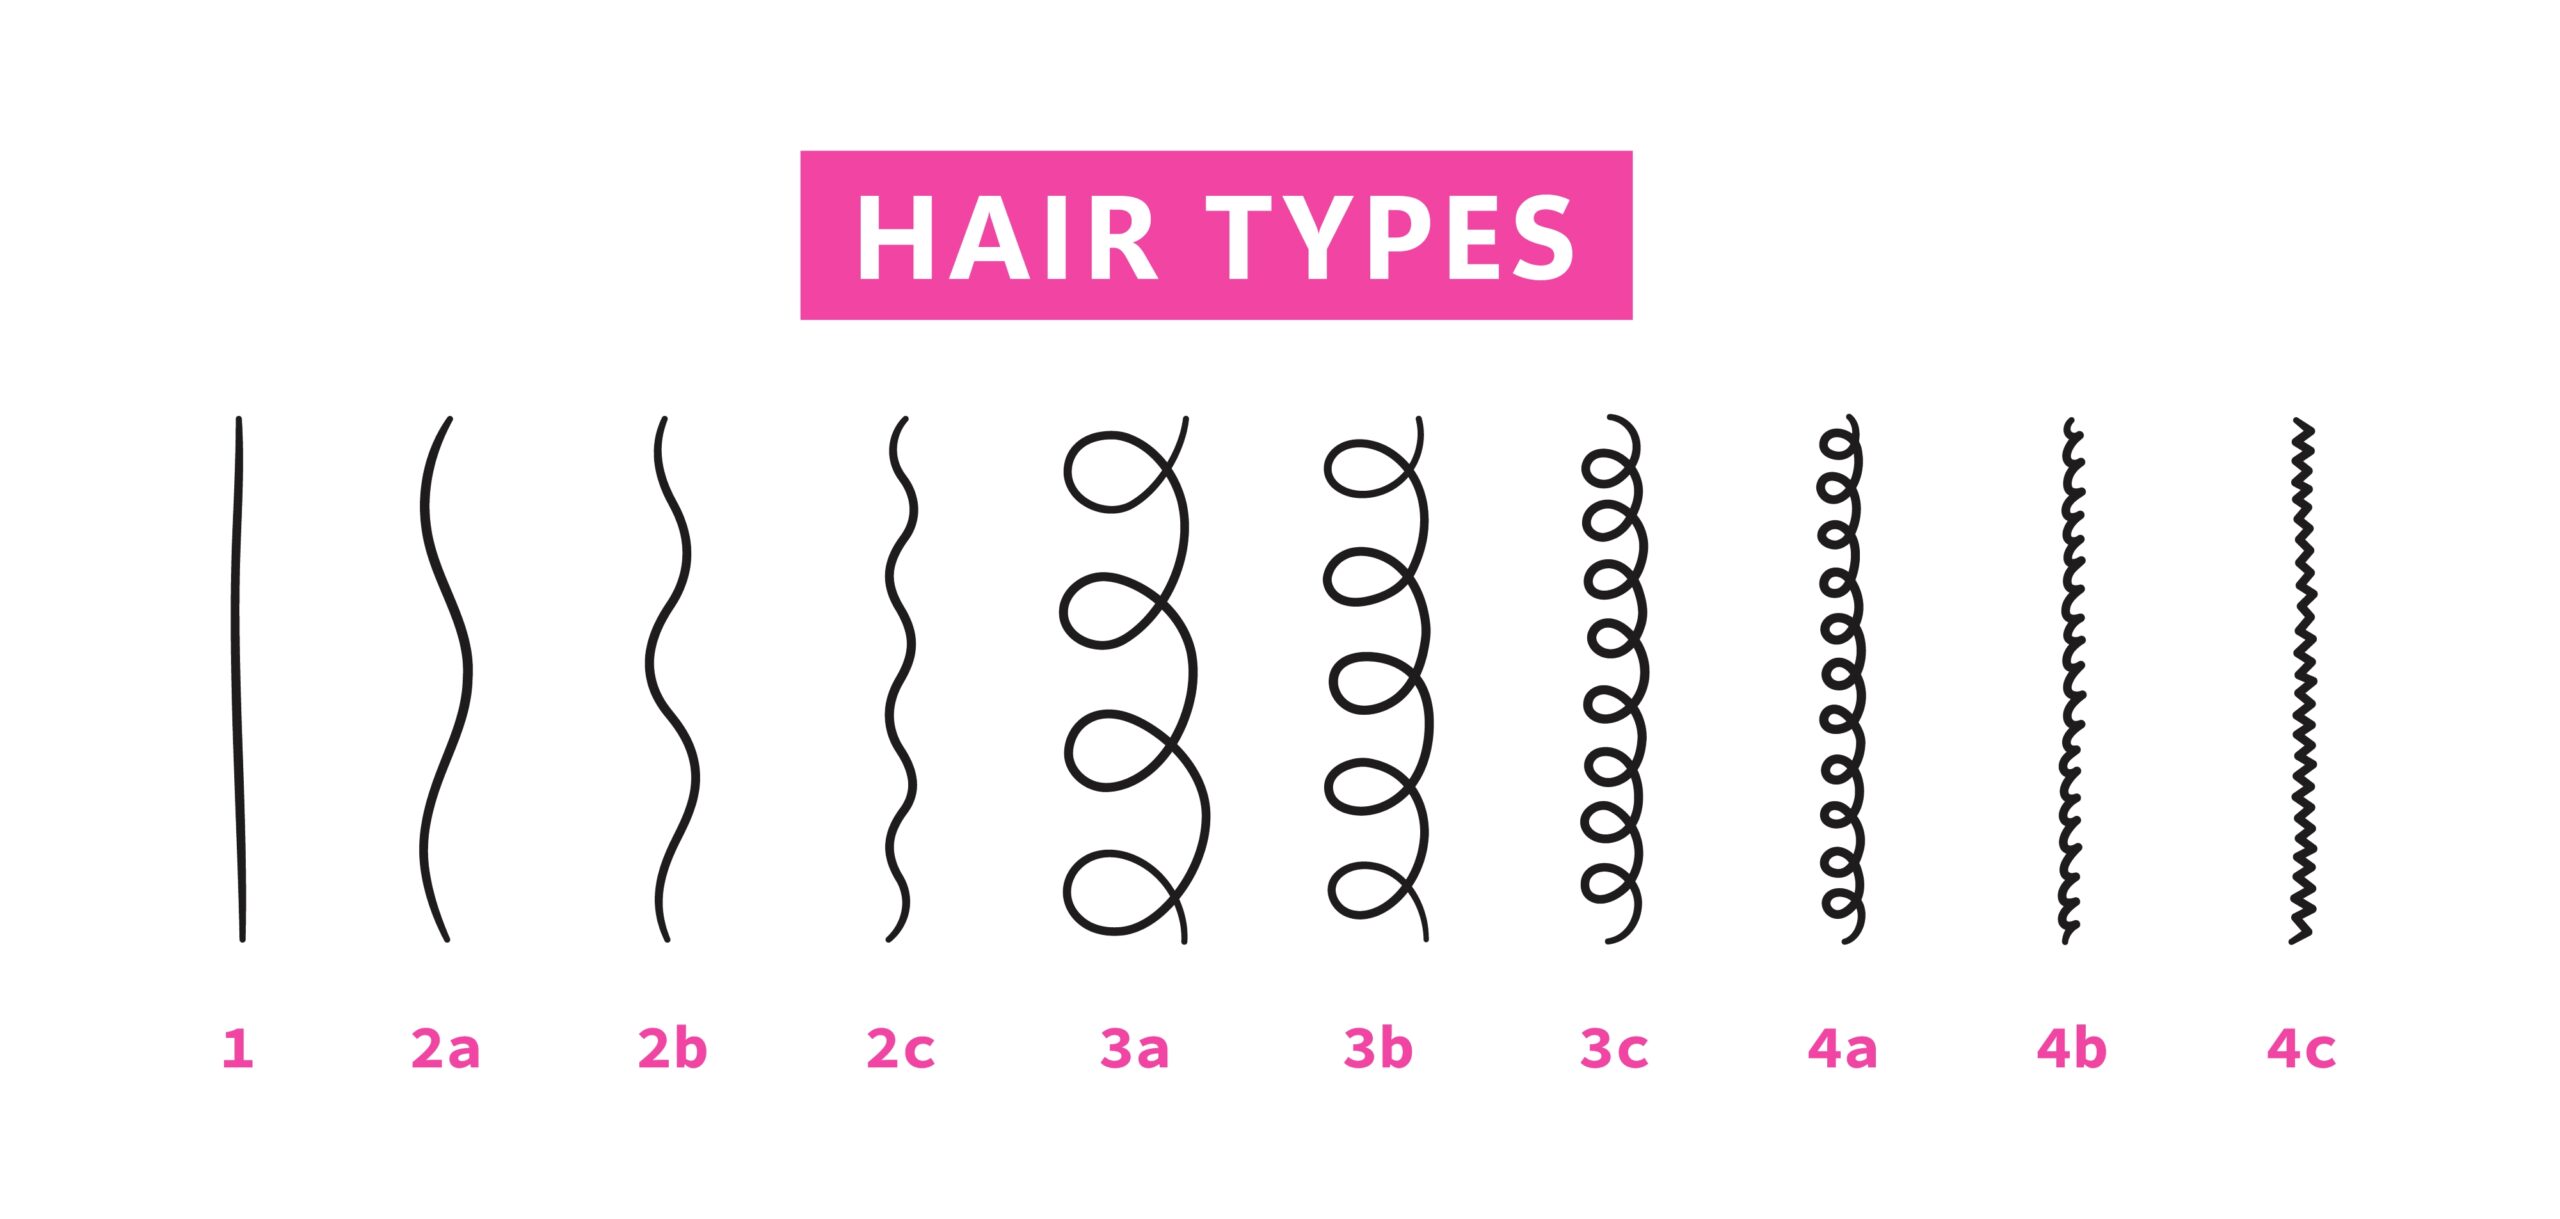 Hair Types and Hair Care